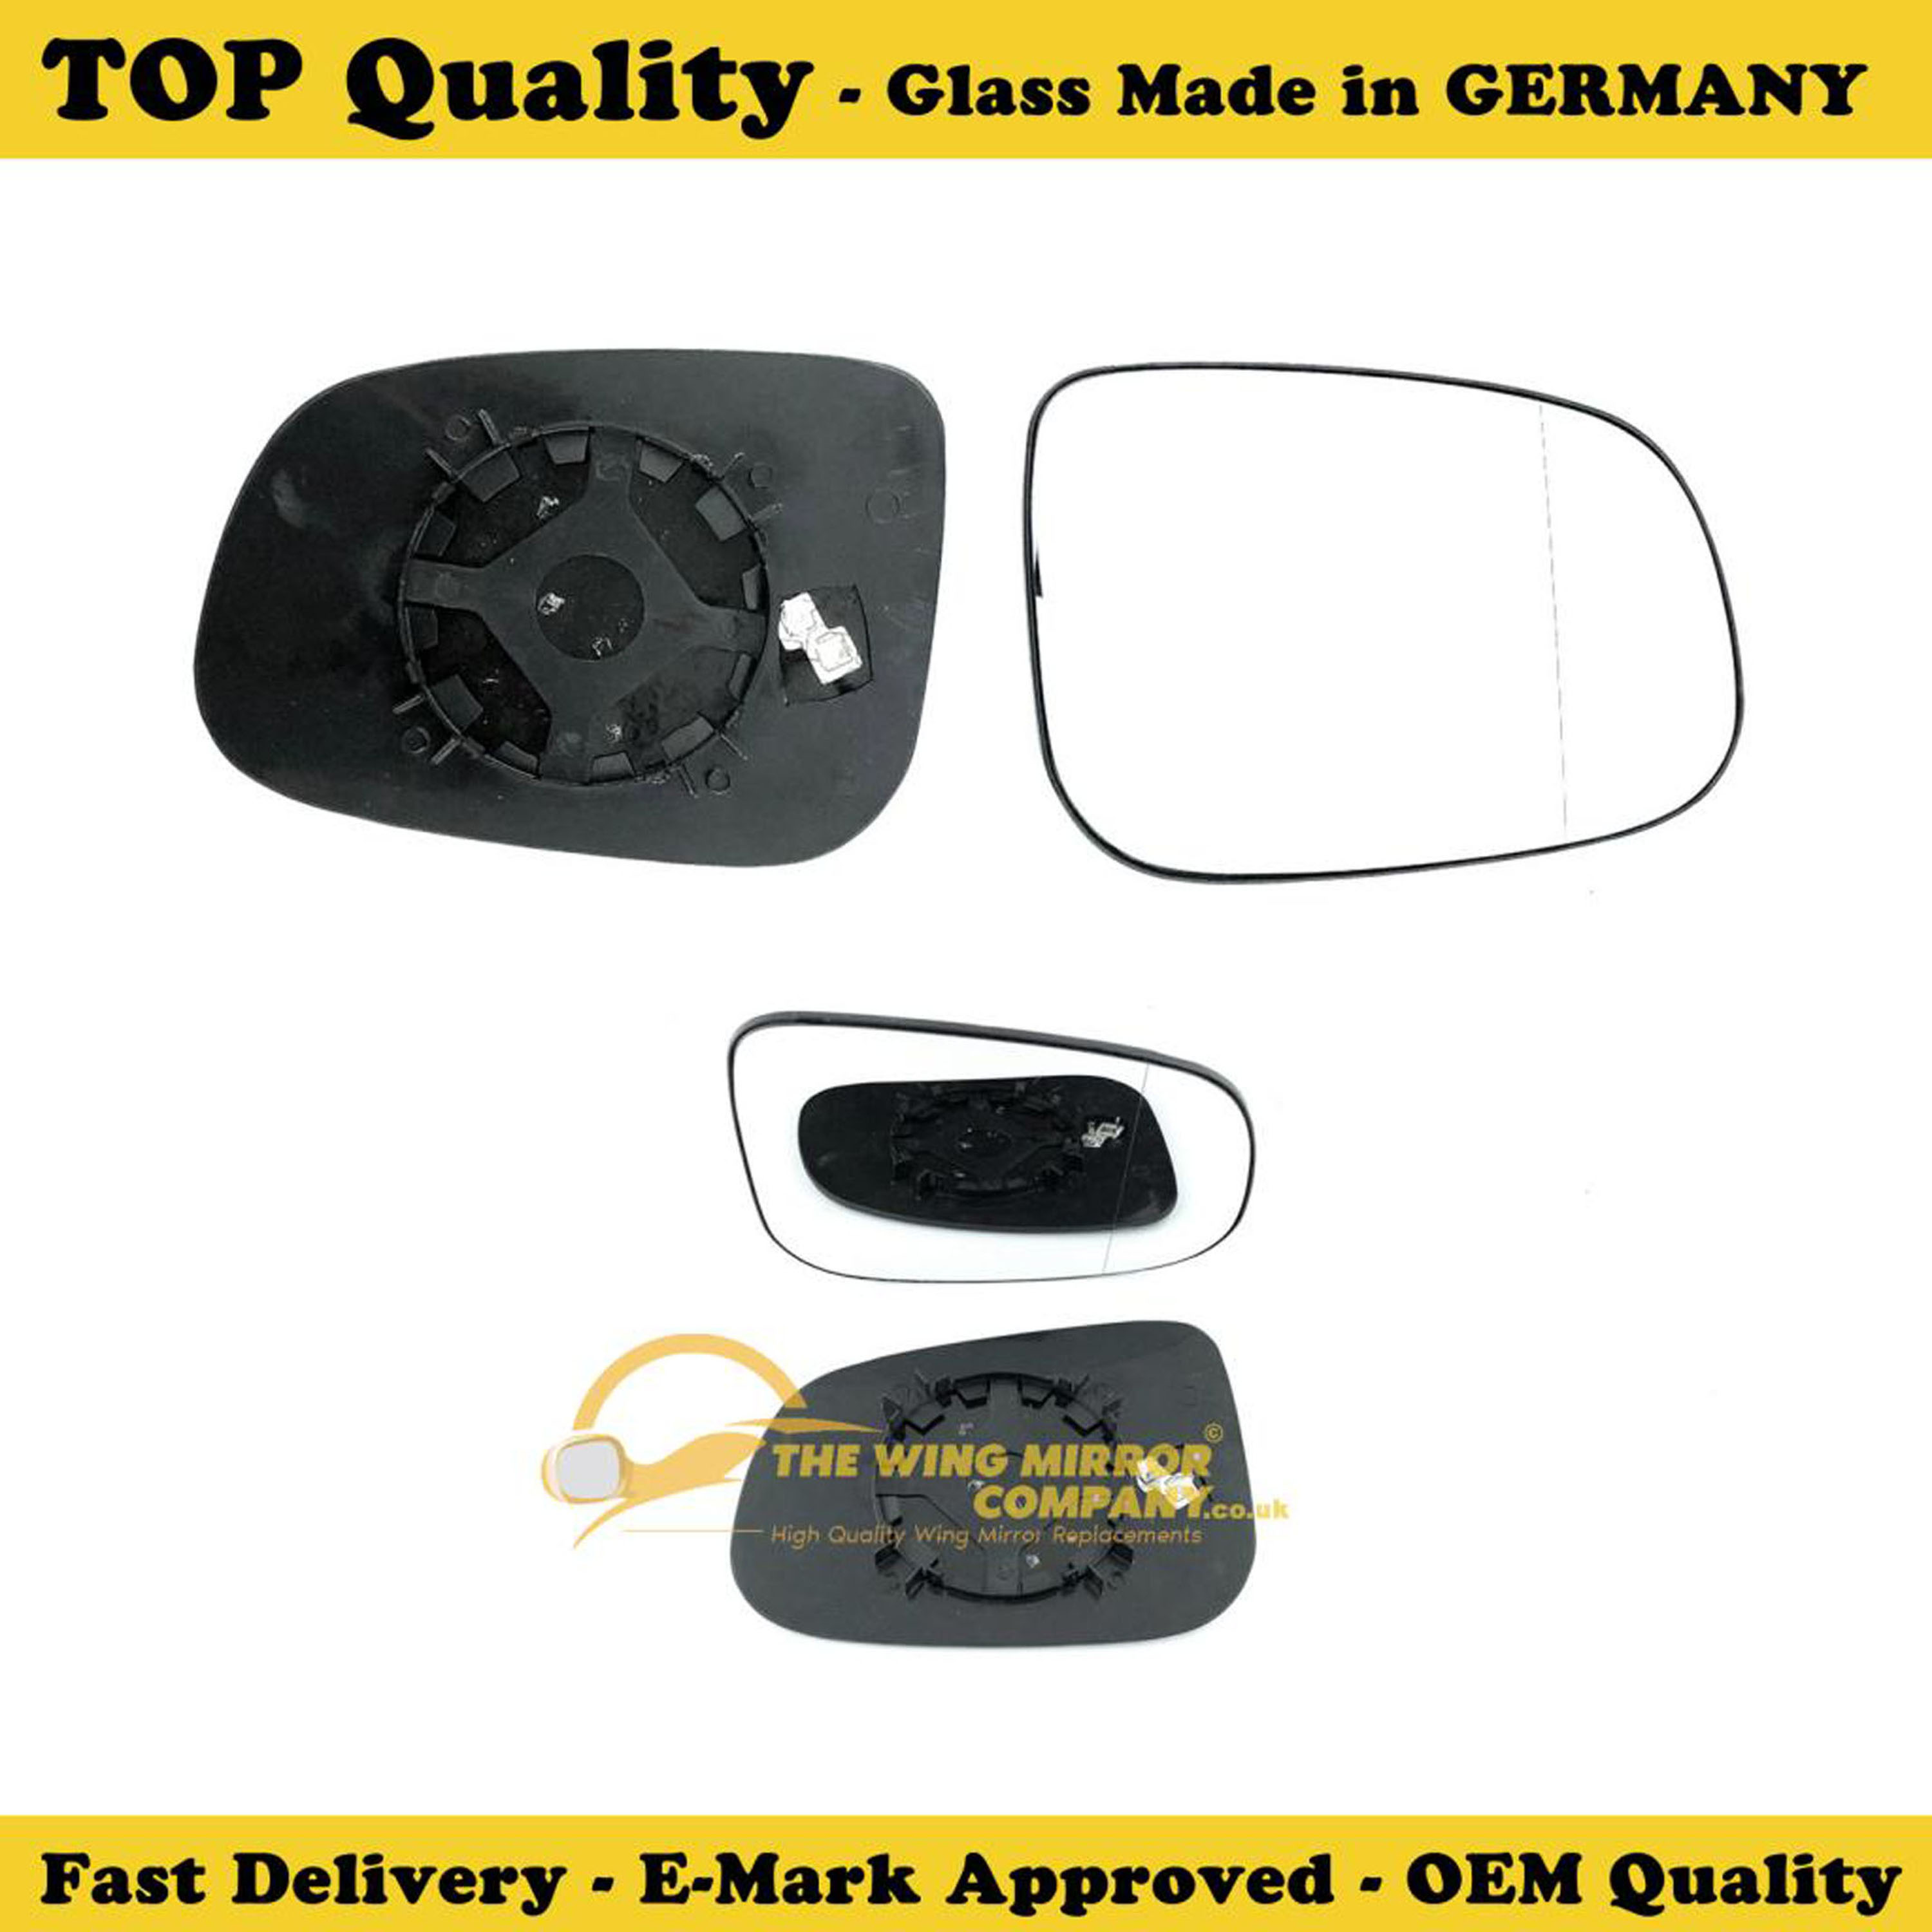 Low Price and High Quality Guarantee on volvo v50 Driver Side